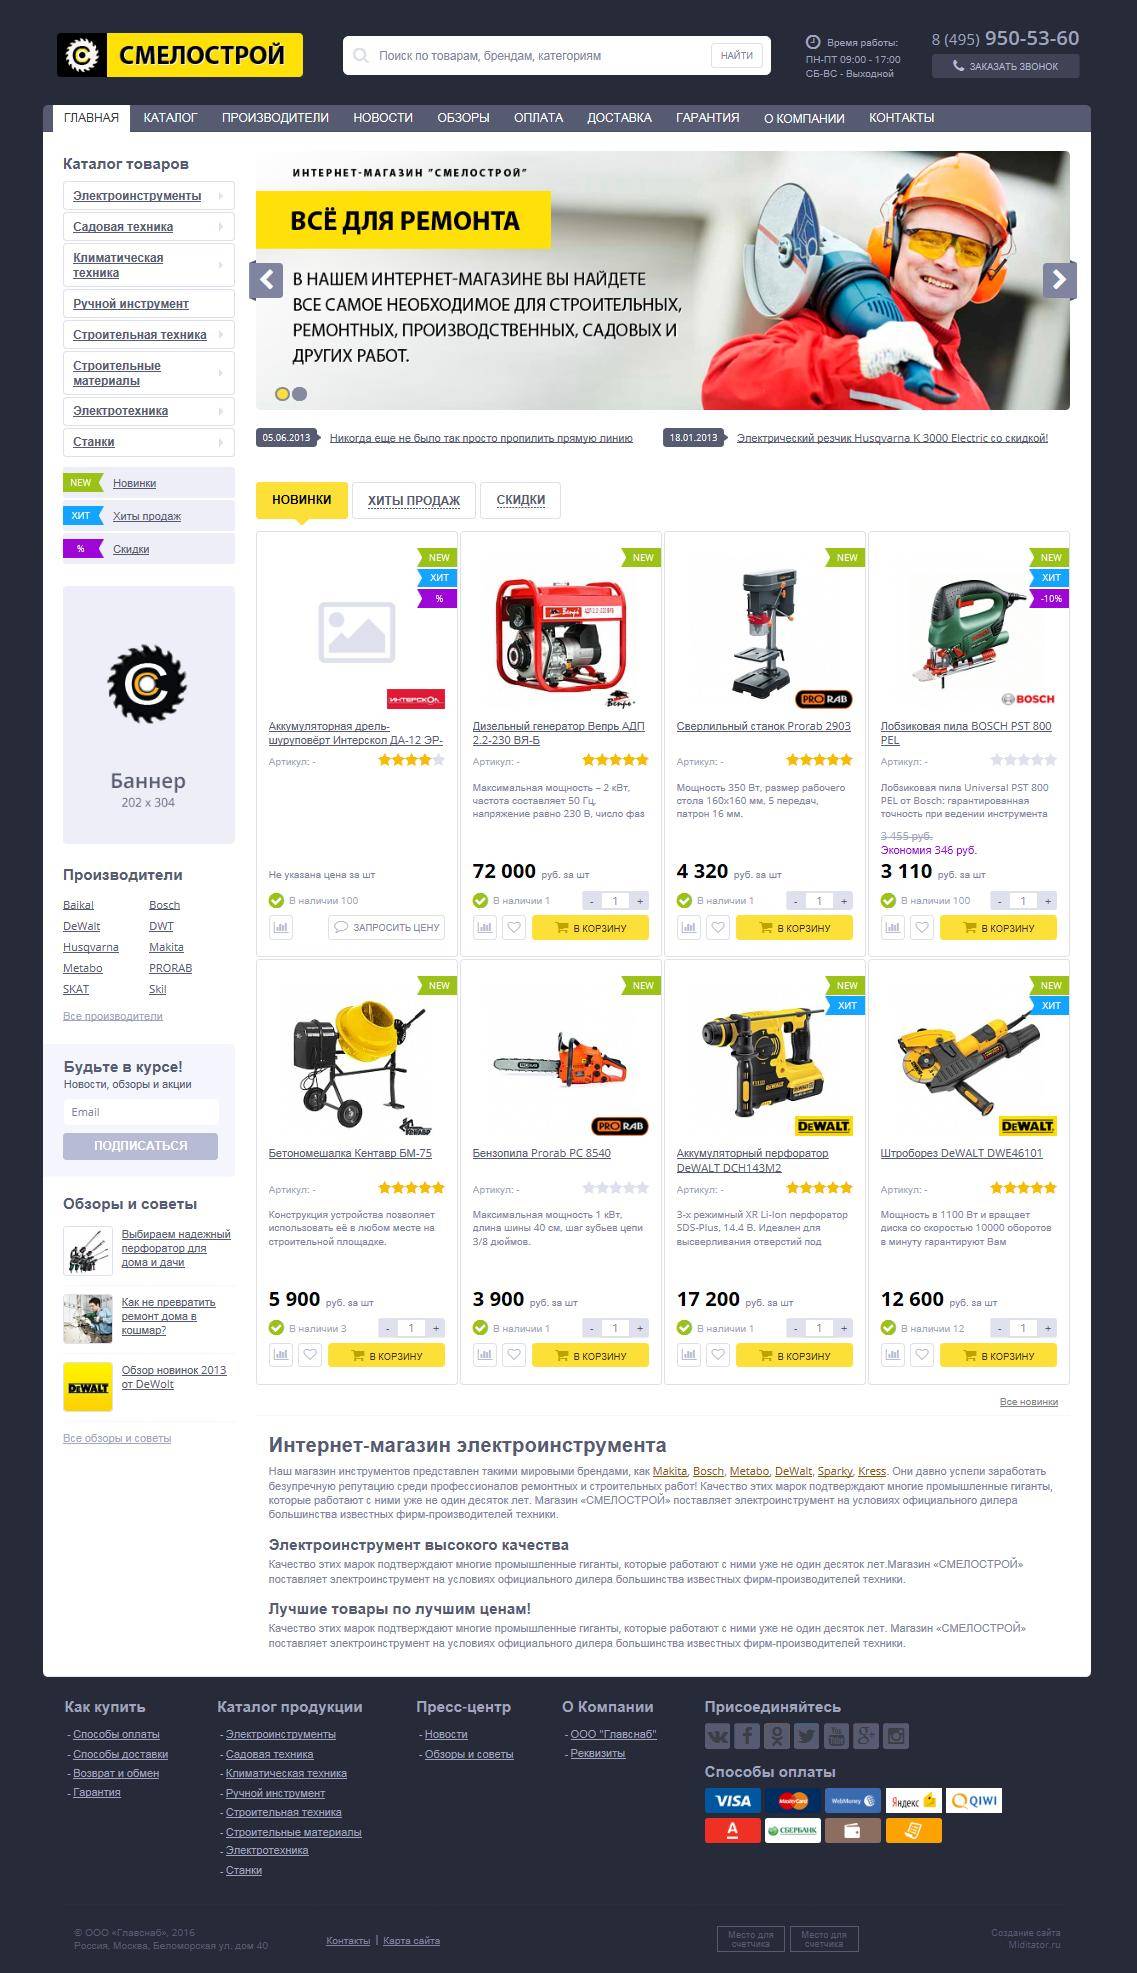 Create an online store for all repairs